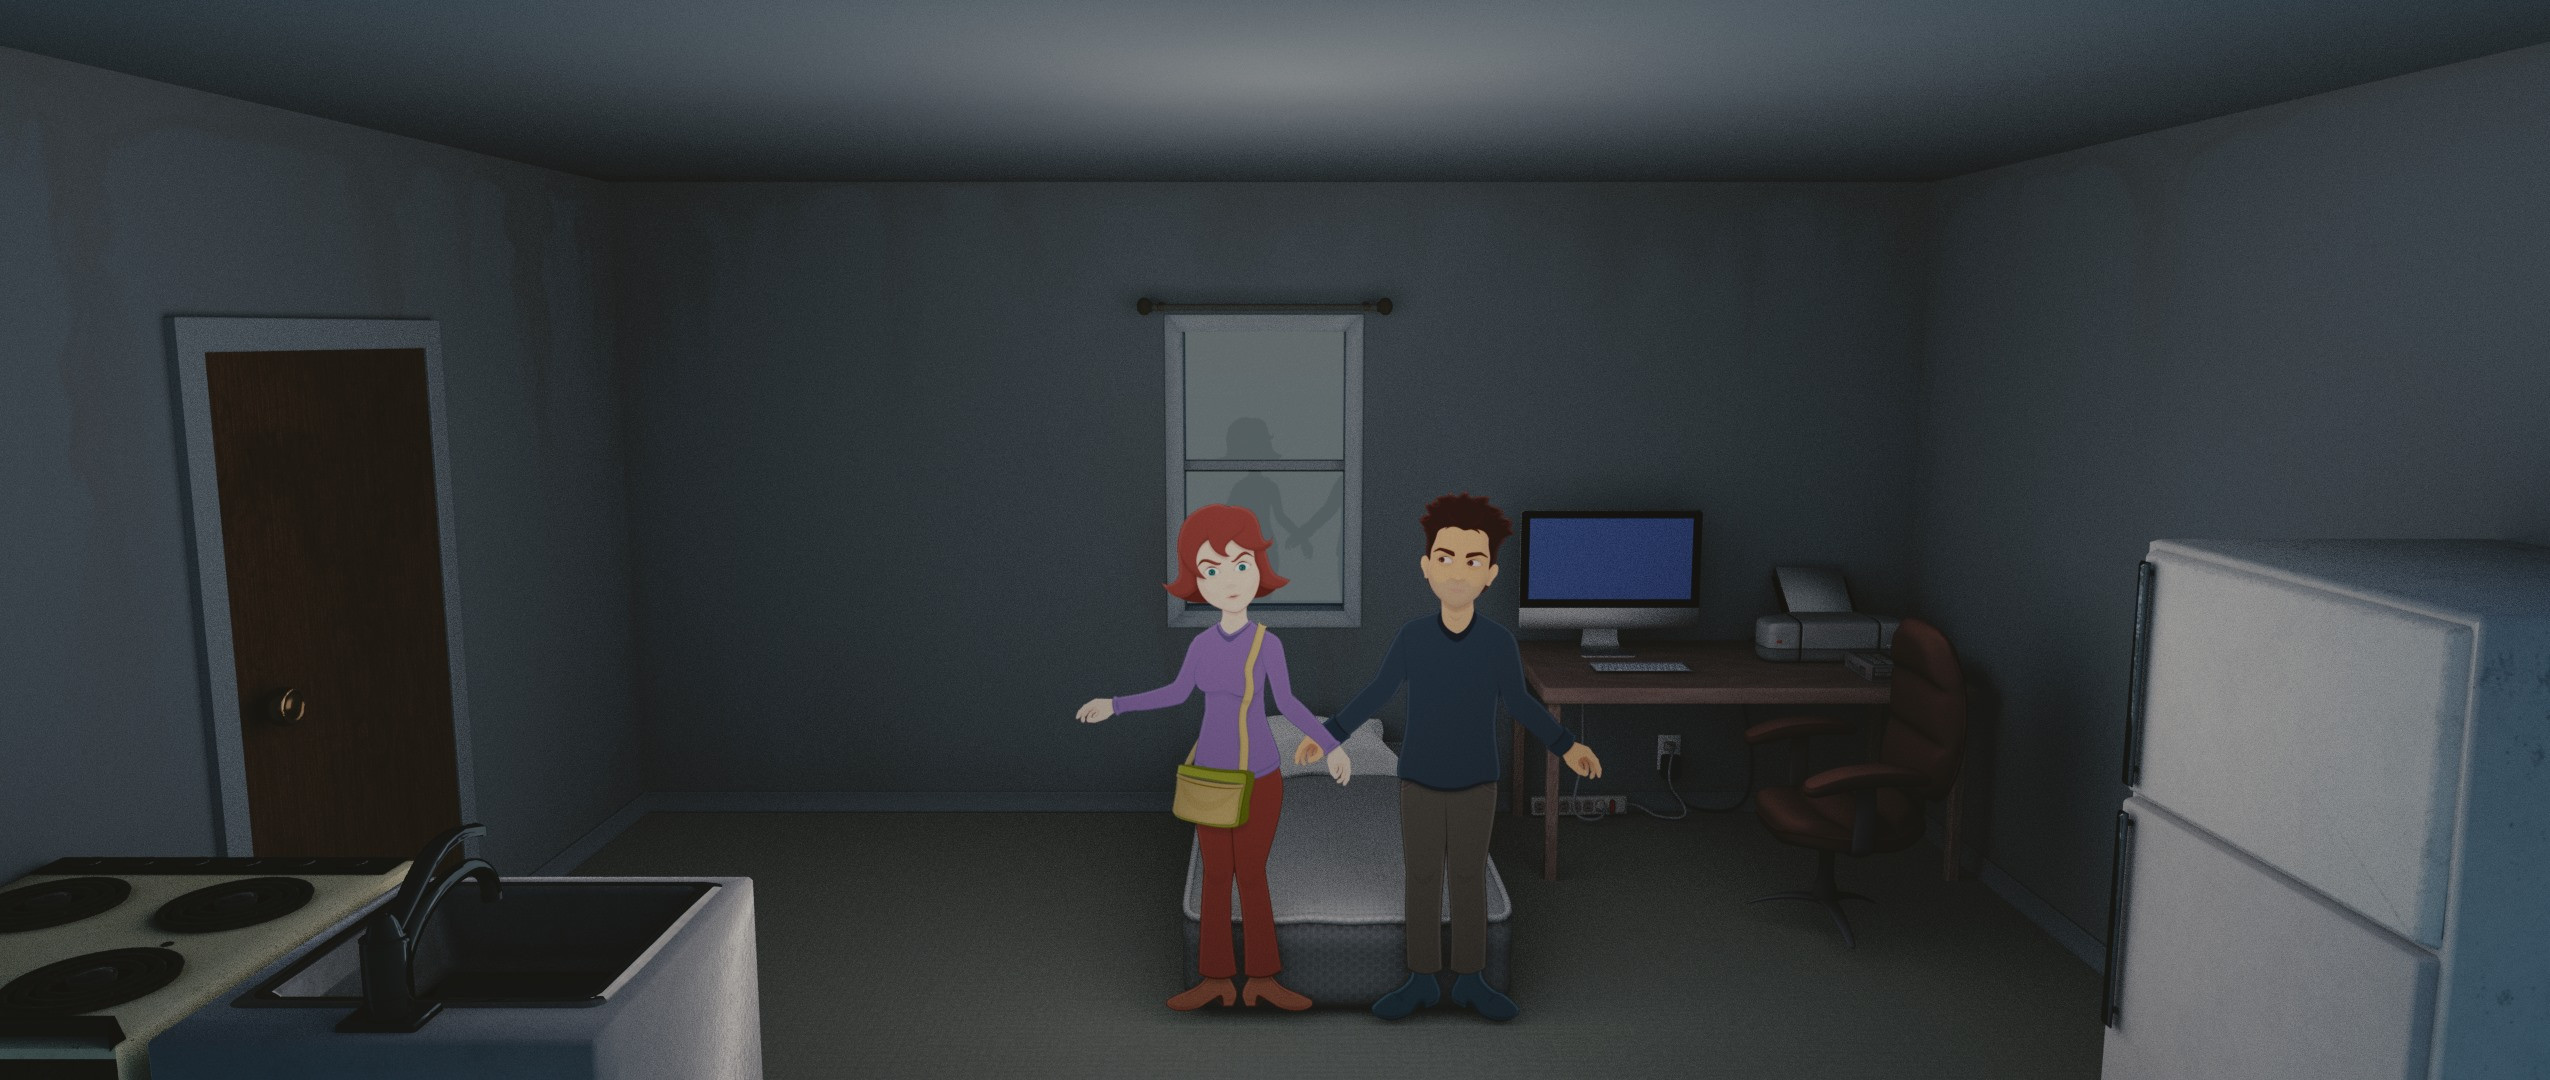 3D mixed with 2D Animated characters made in Moho.